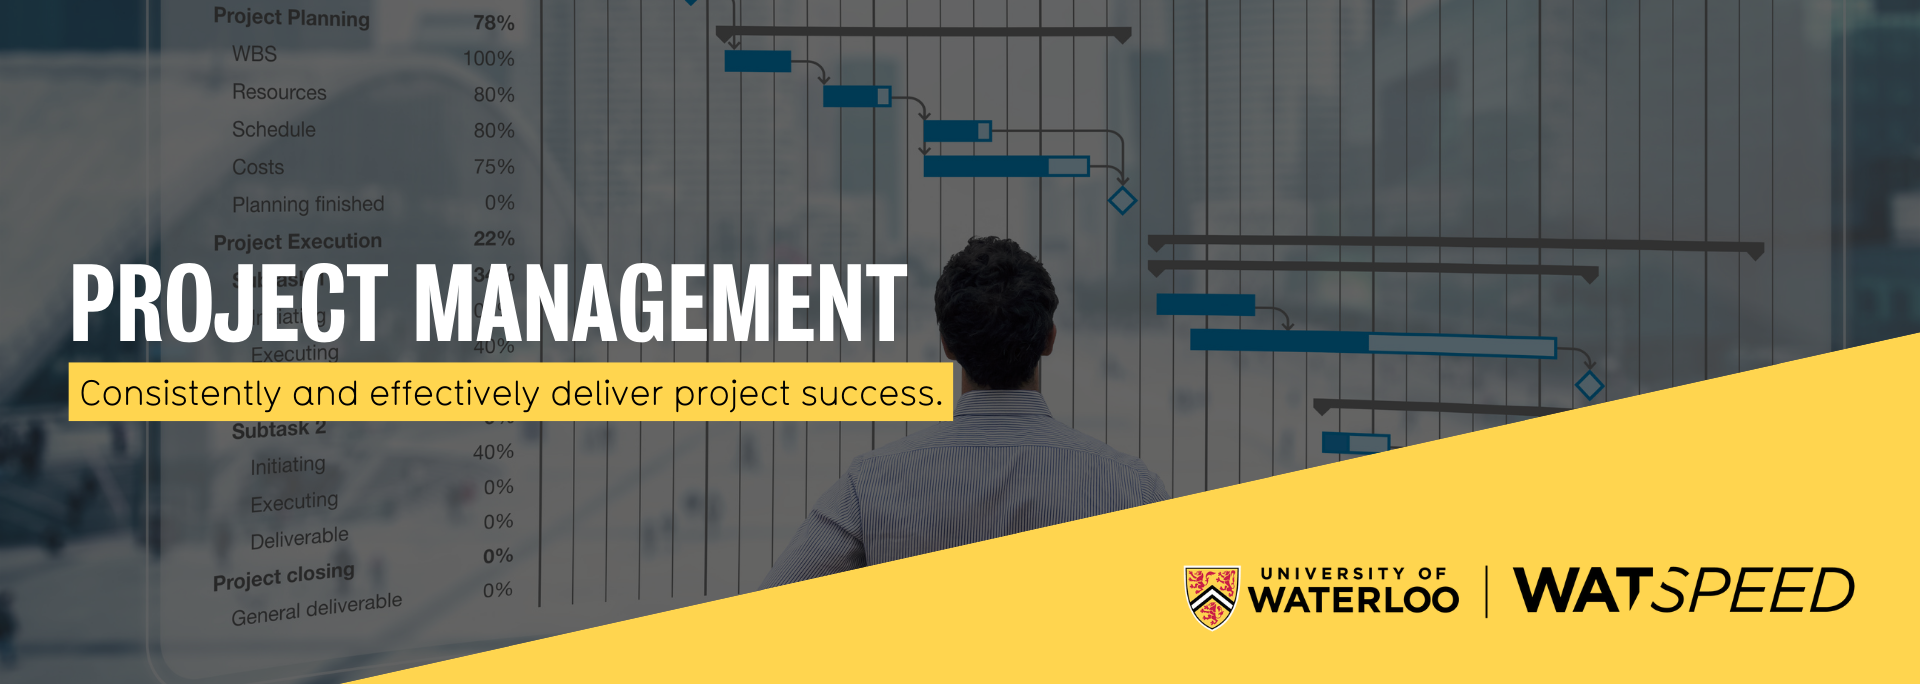 Project management - Consistently and effectively deliver project success